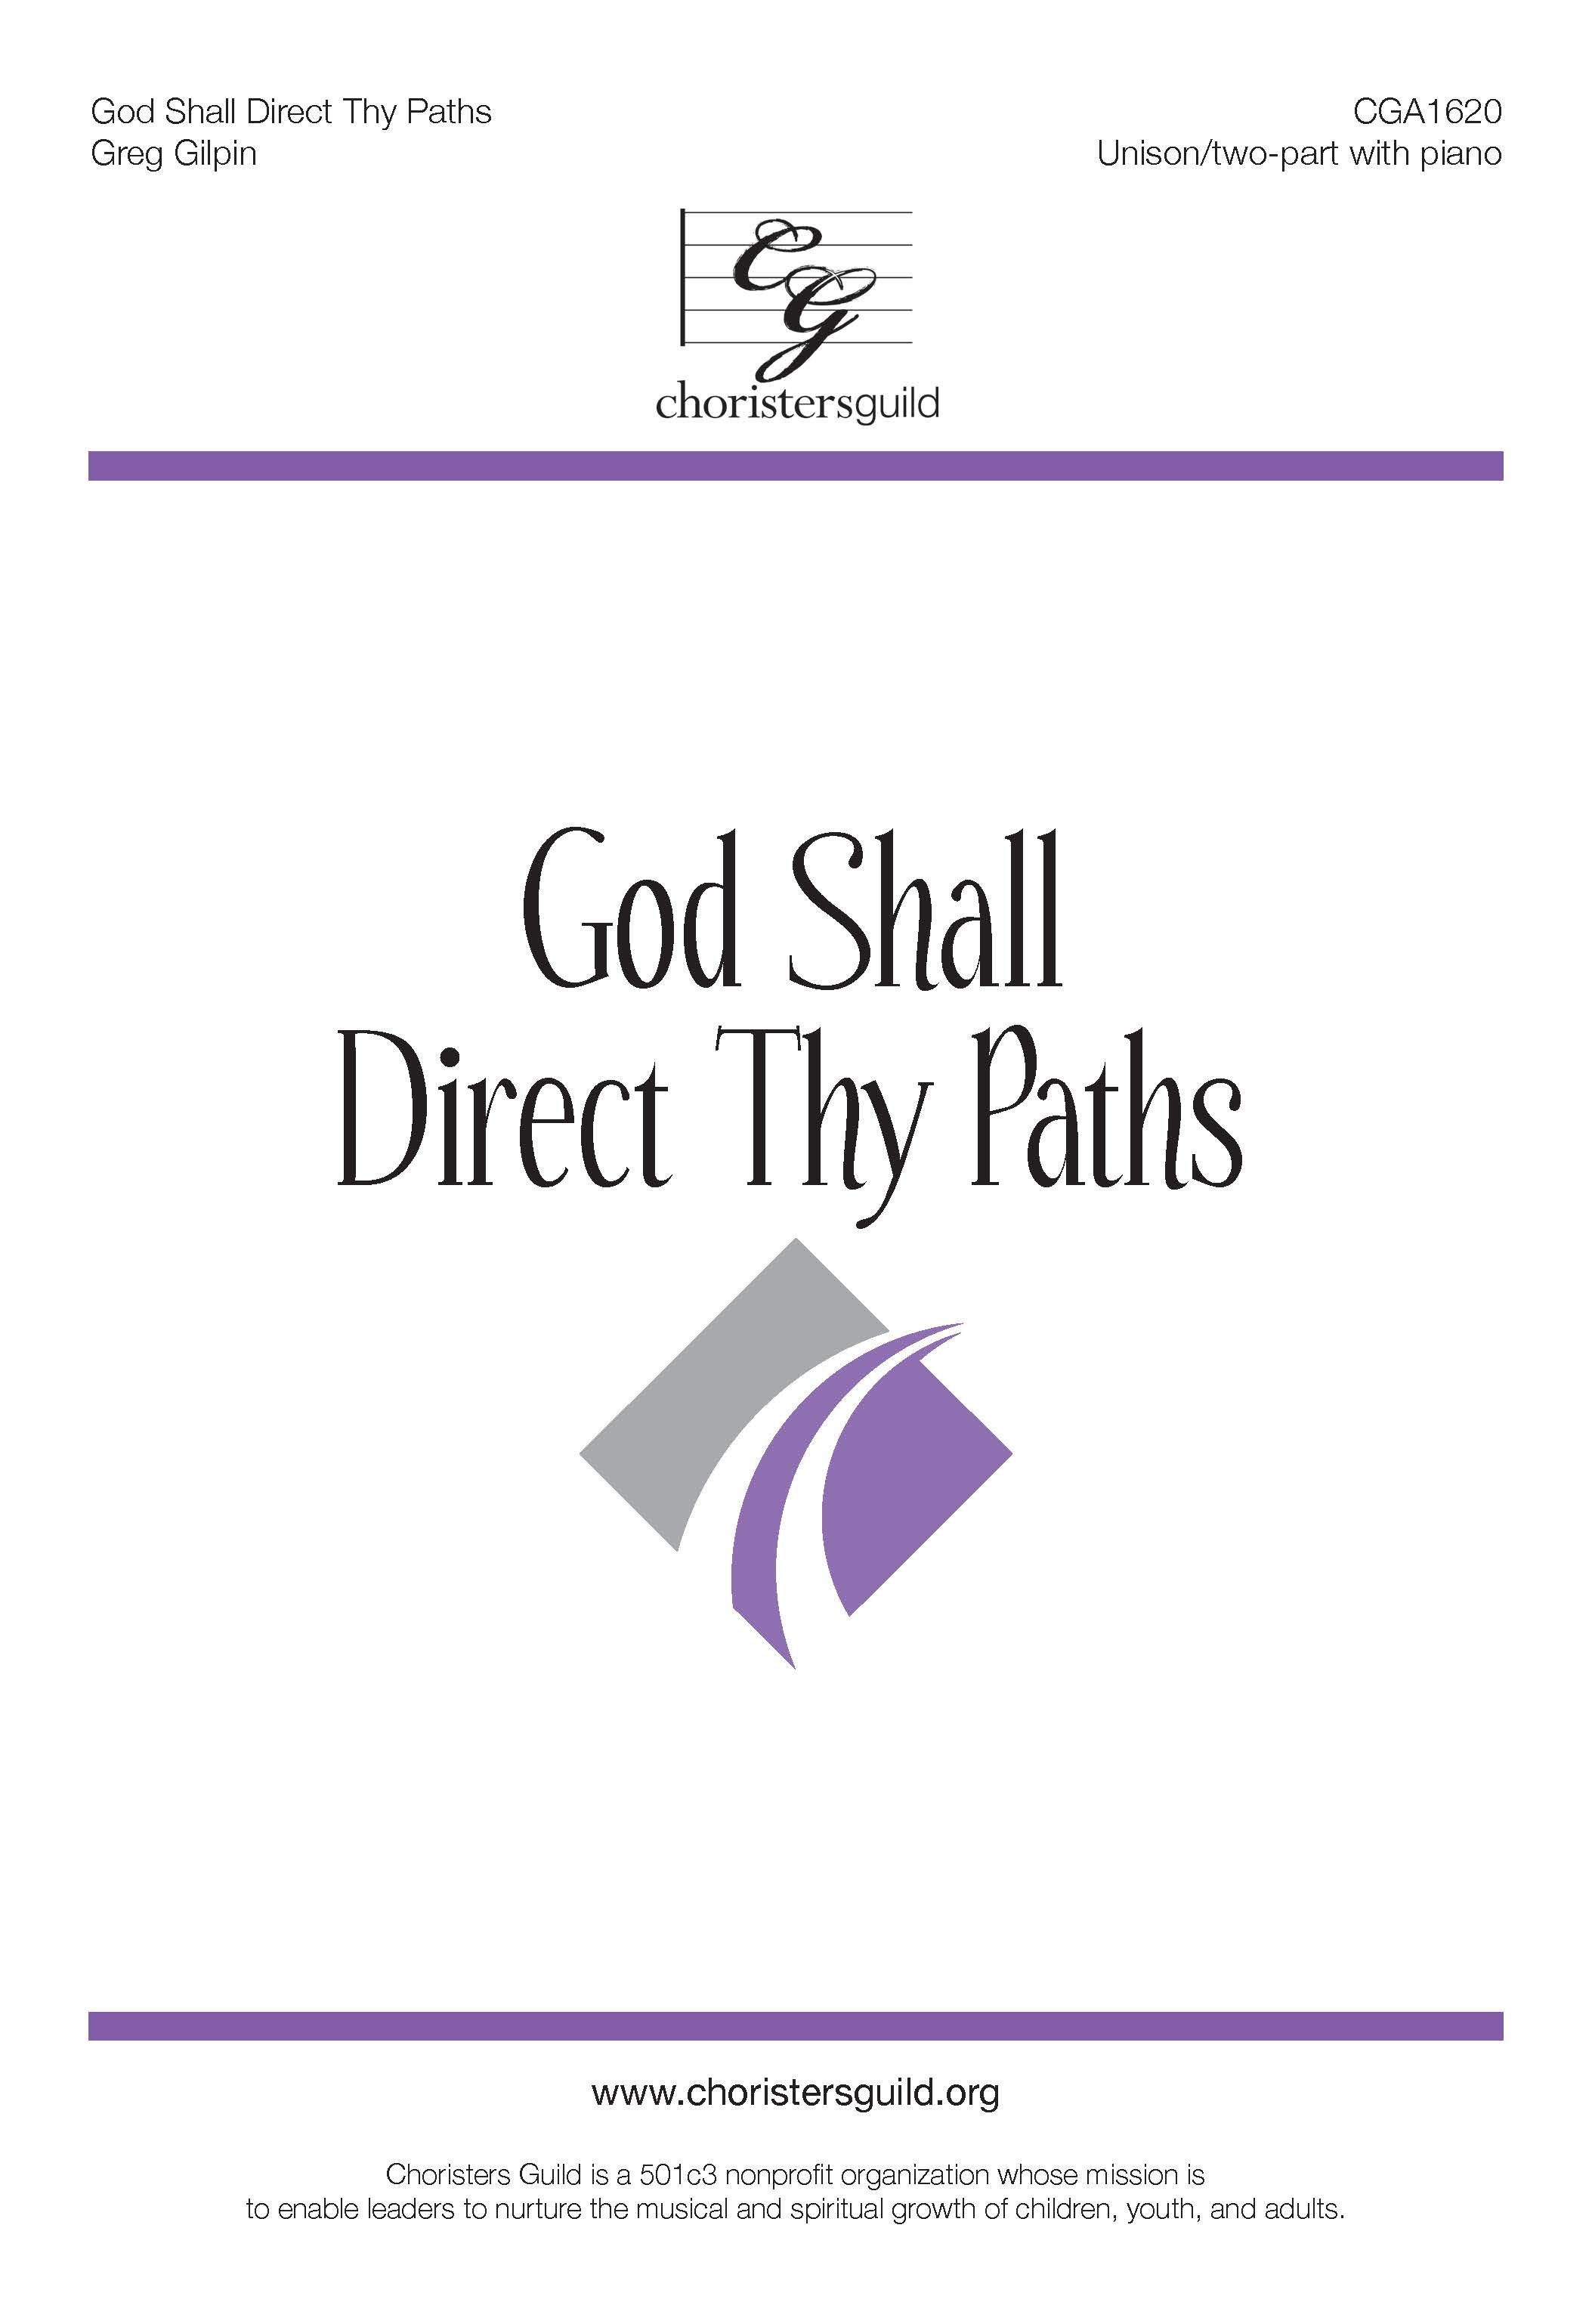 God Shall Direct Thy Paths - Unison/Two-part